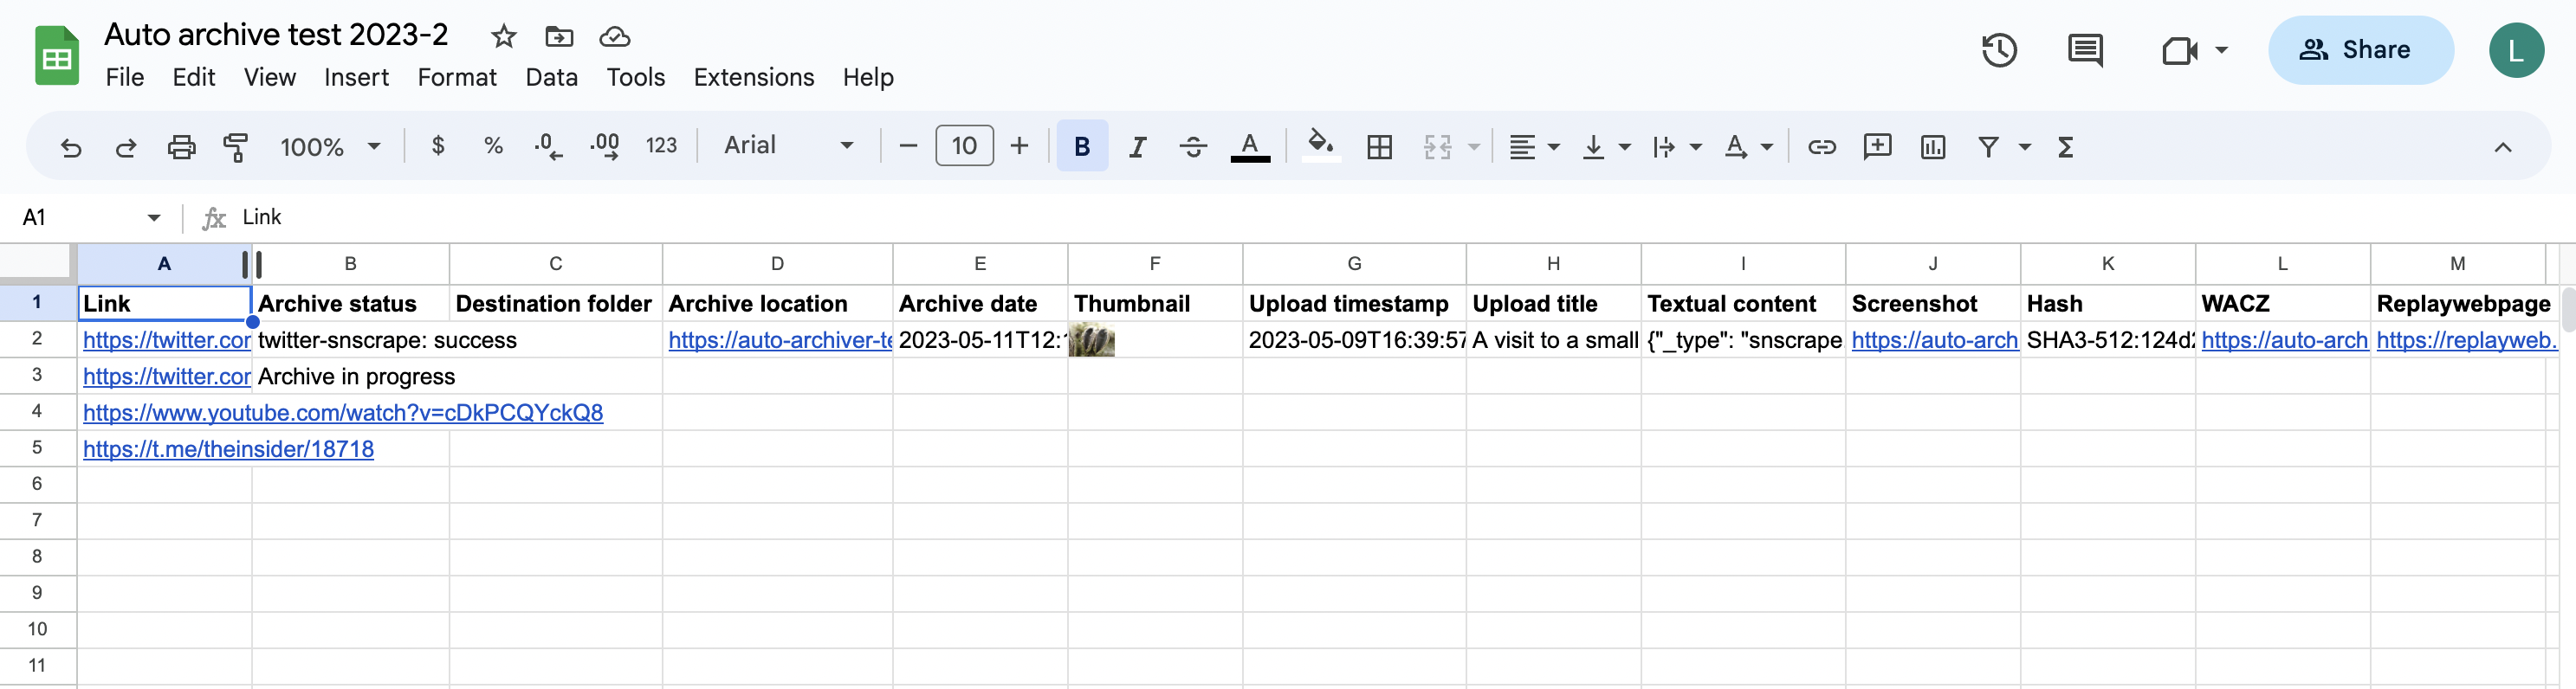 A screenshot of a Google Spreadsheet with column headers defined as above, and several Youtube and Twitter URLs in the "Link" column. The auto archiver has added "archive in progress" to one of the status columns.